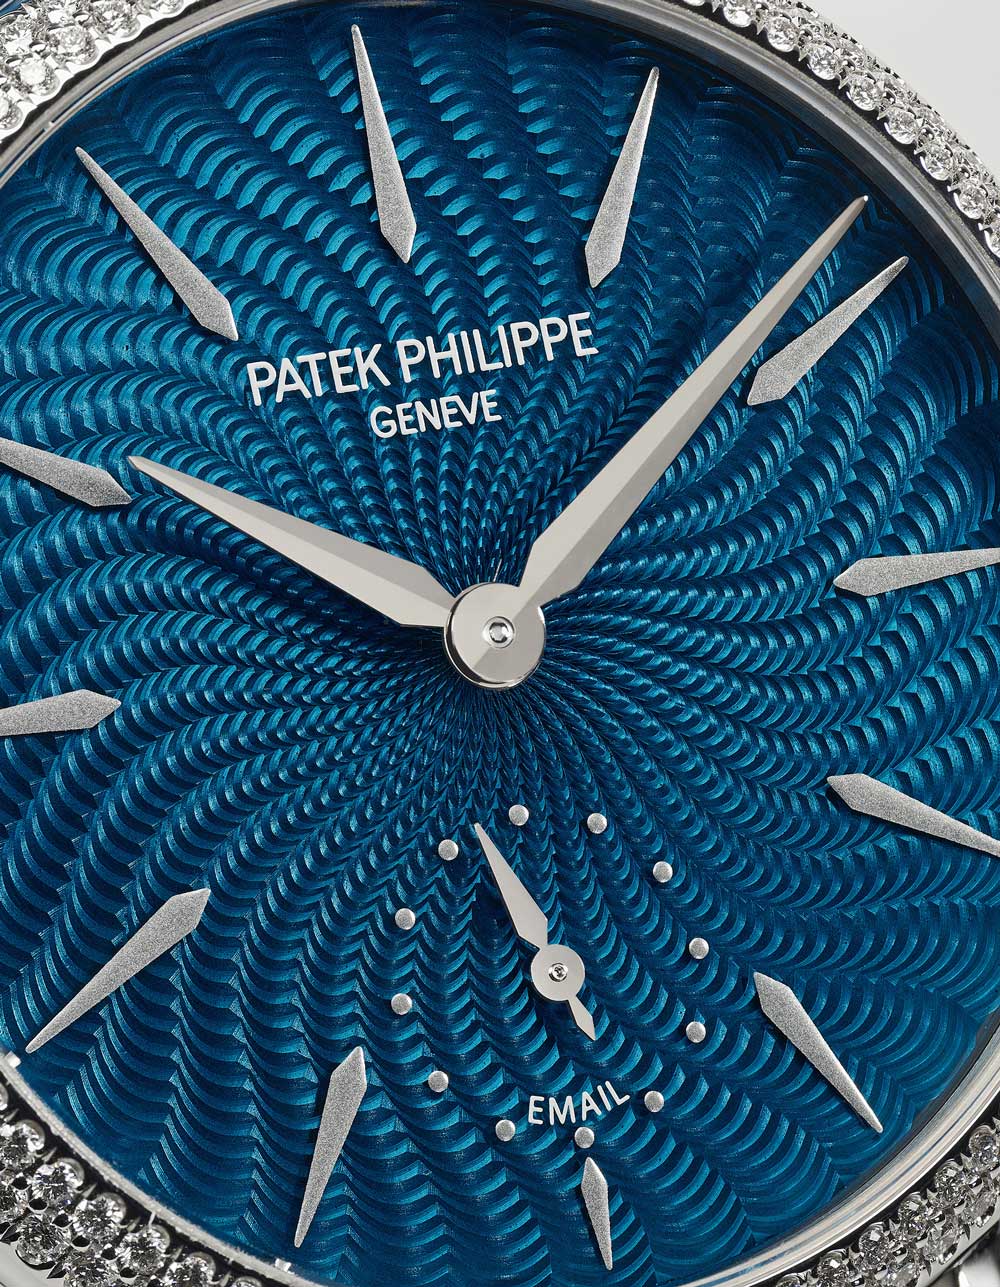 Entirely hand-guilloched with a swirling pattern inspired by the “Siamese Fighting Fish” first seen in the pocket watch Reference 992/137G-001 from 2019, the dial comes alive with its transparent blue enamel